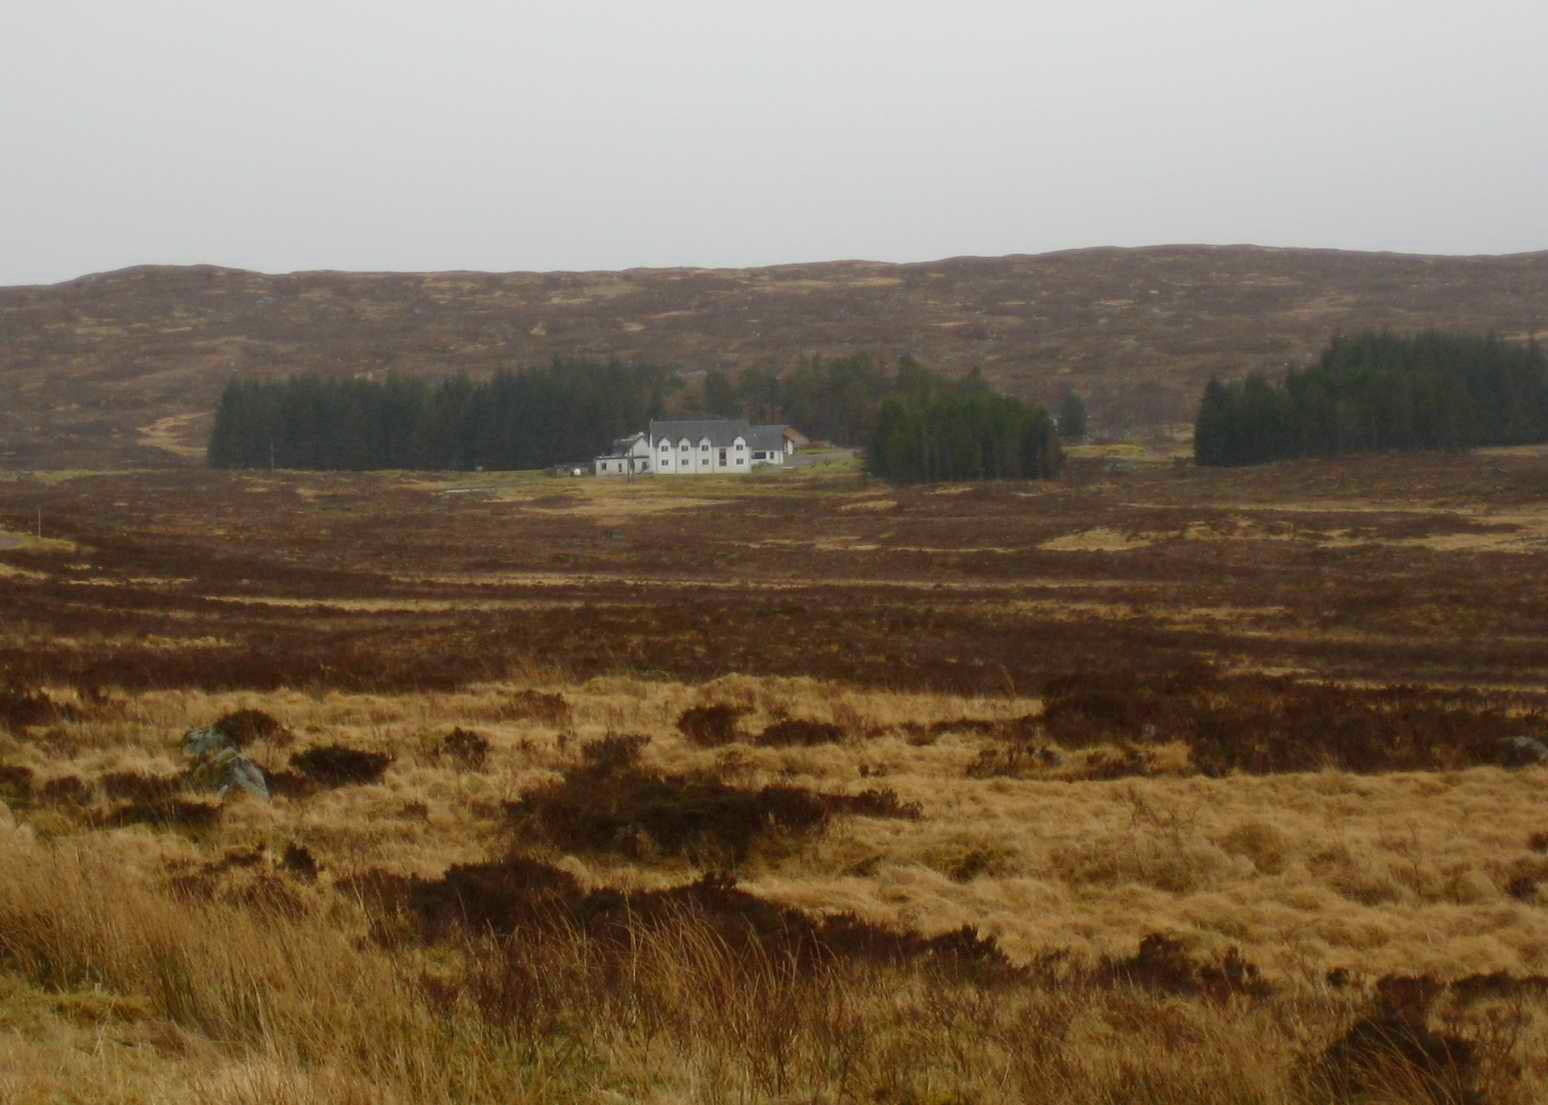 Kings House Hotel in distance